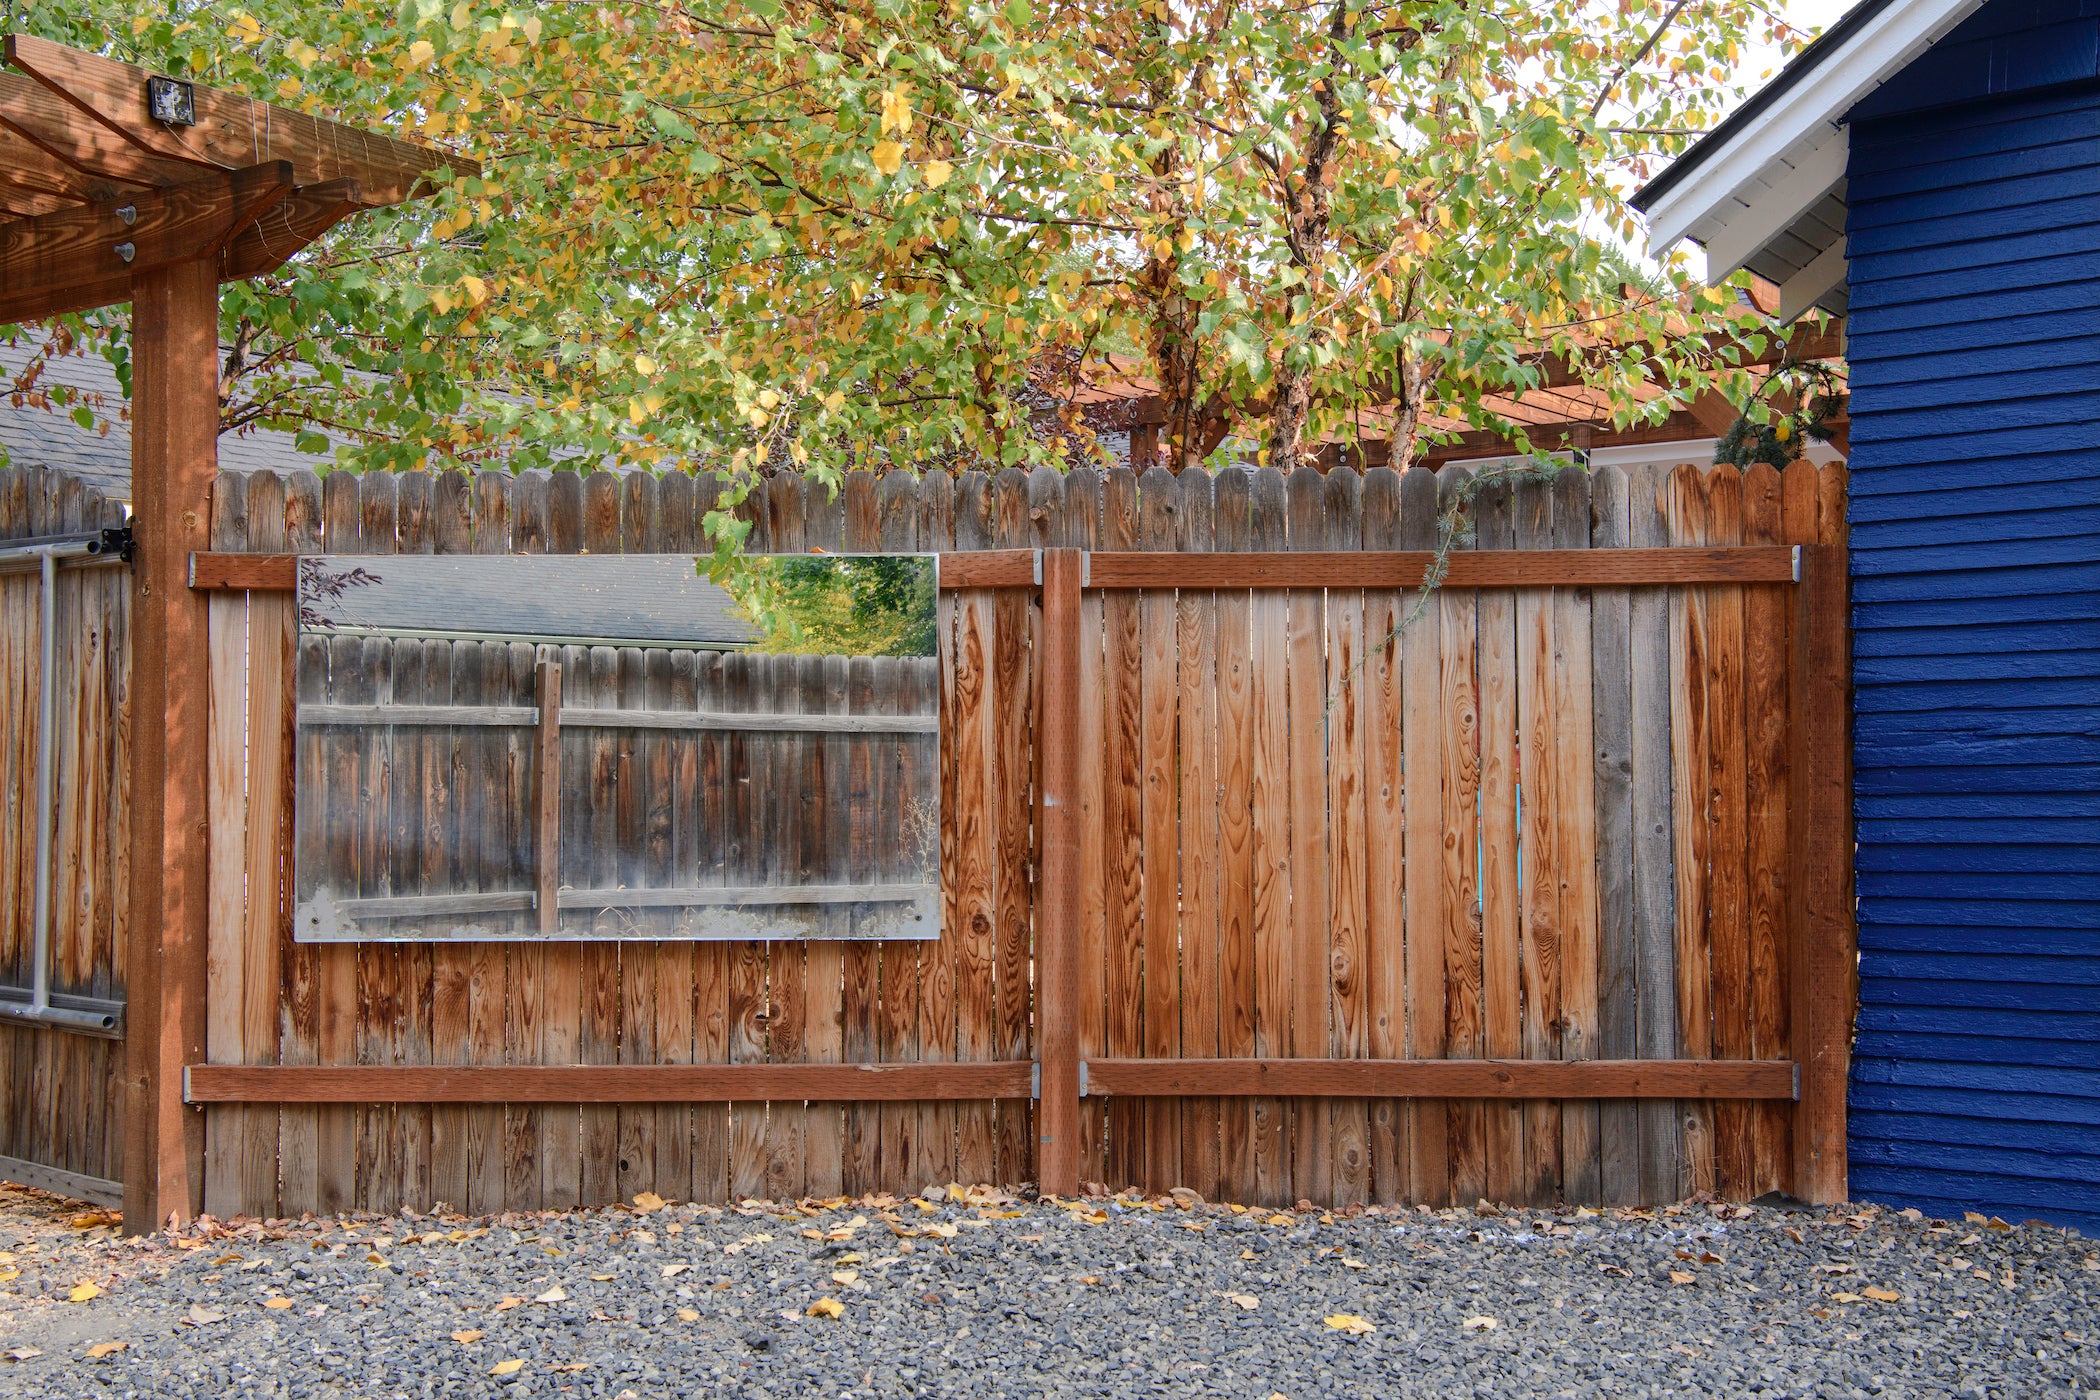 Wooden fence in a yard